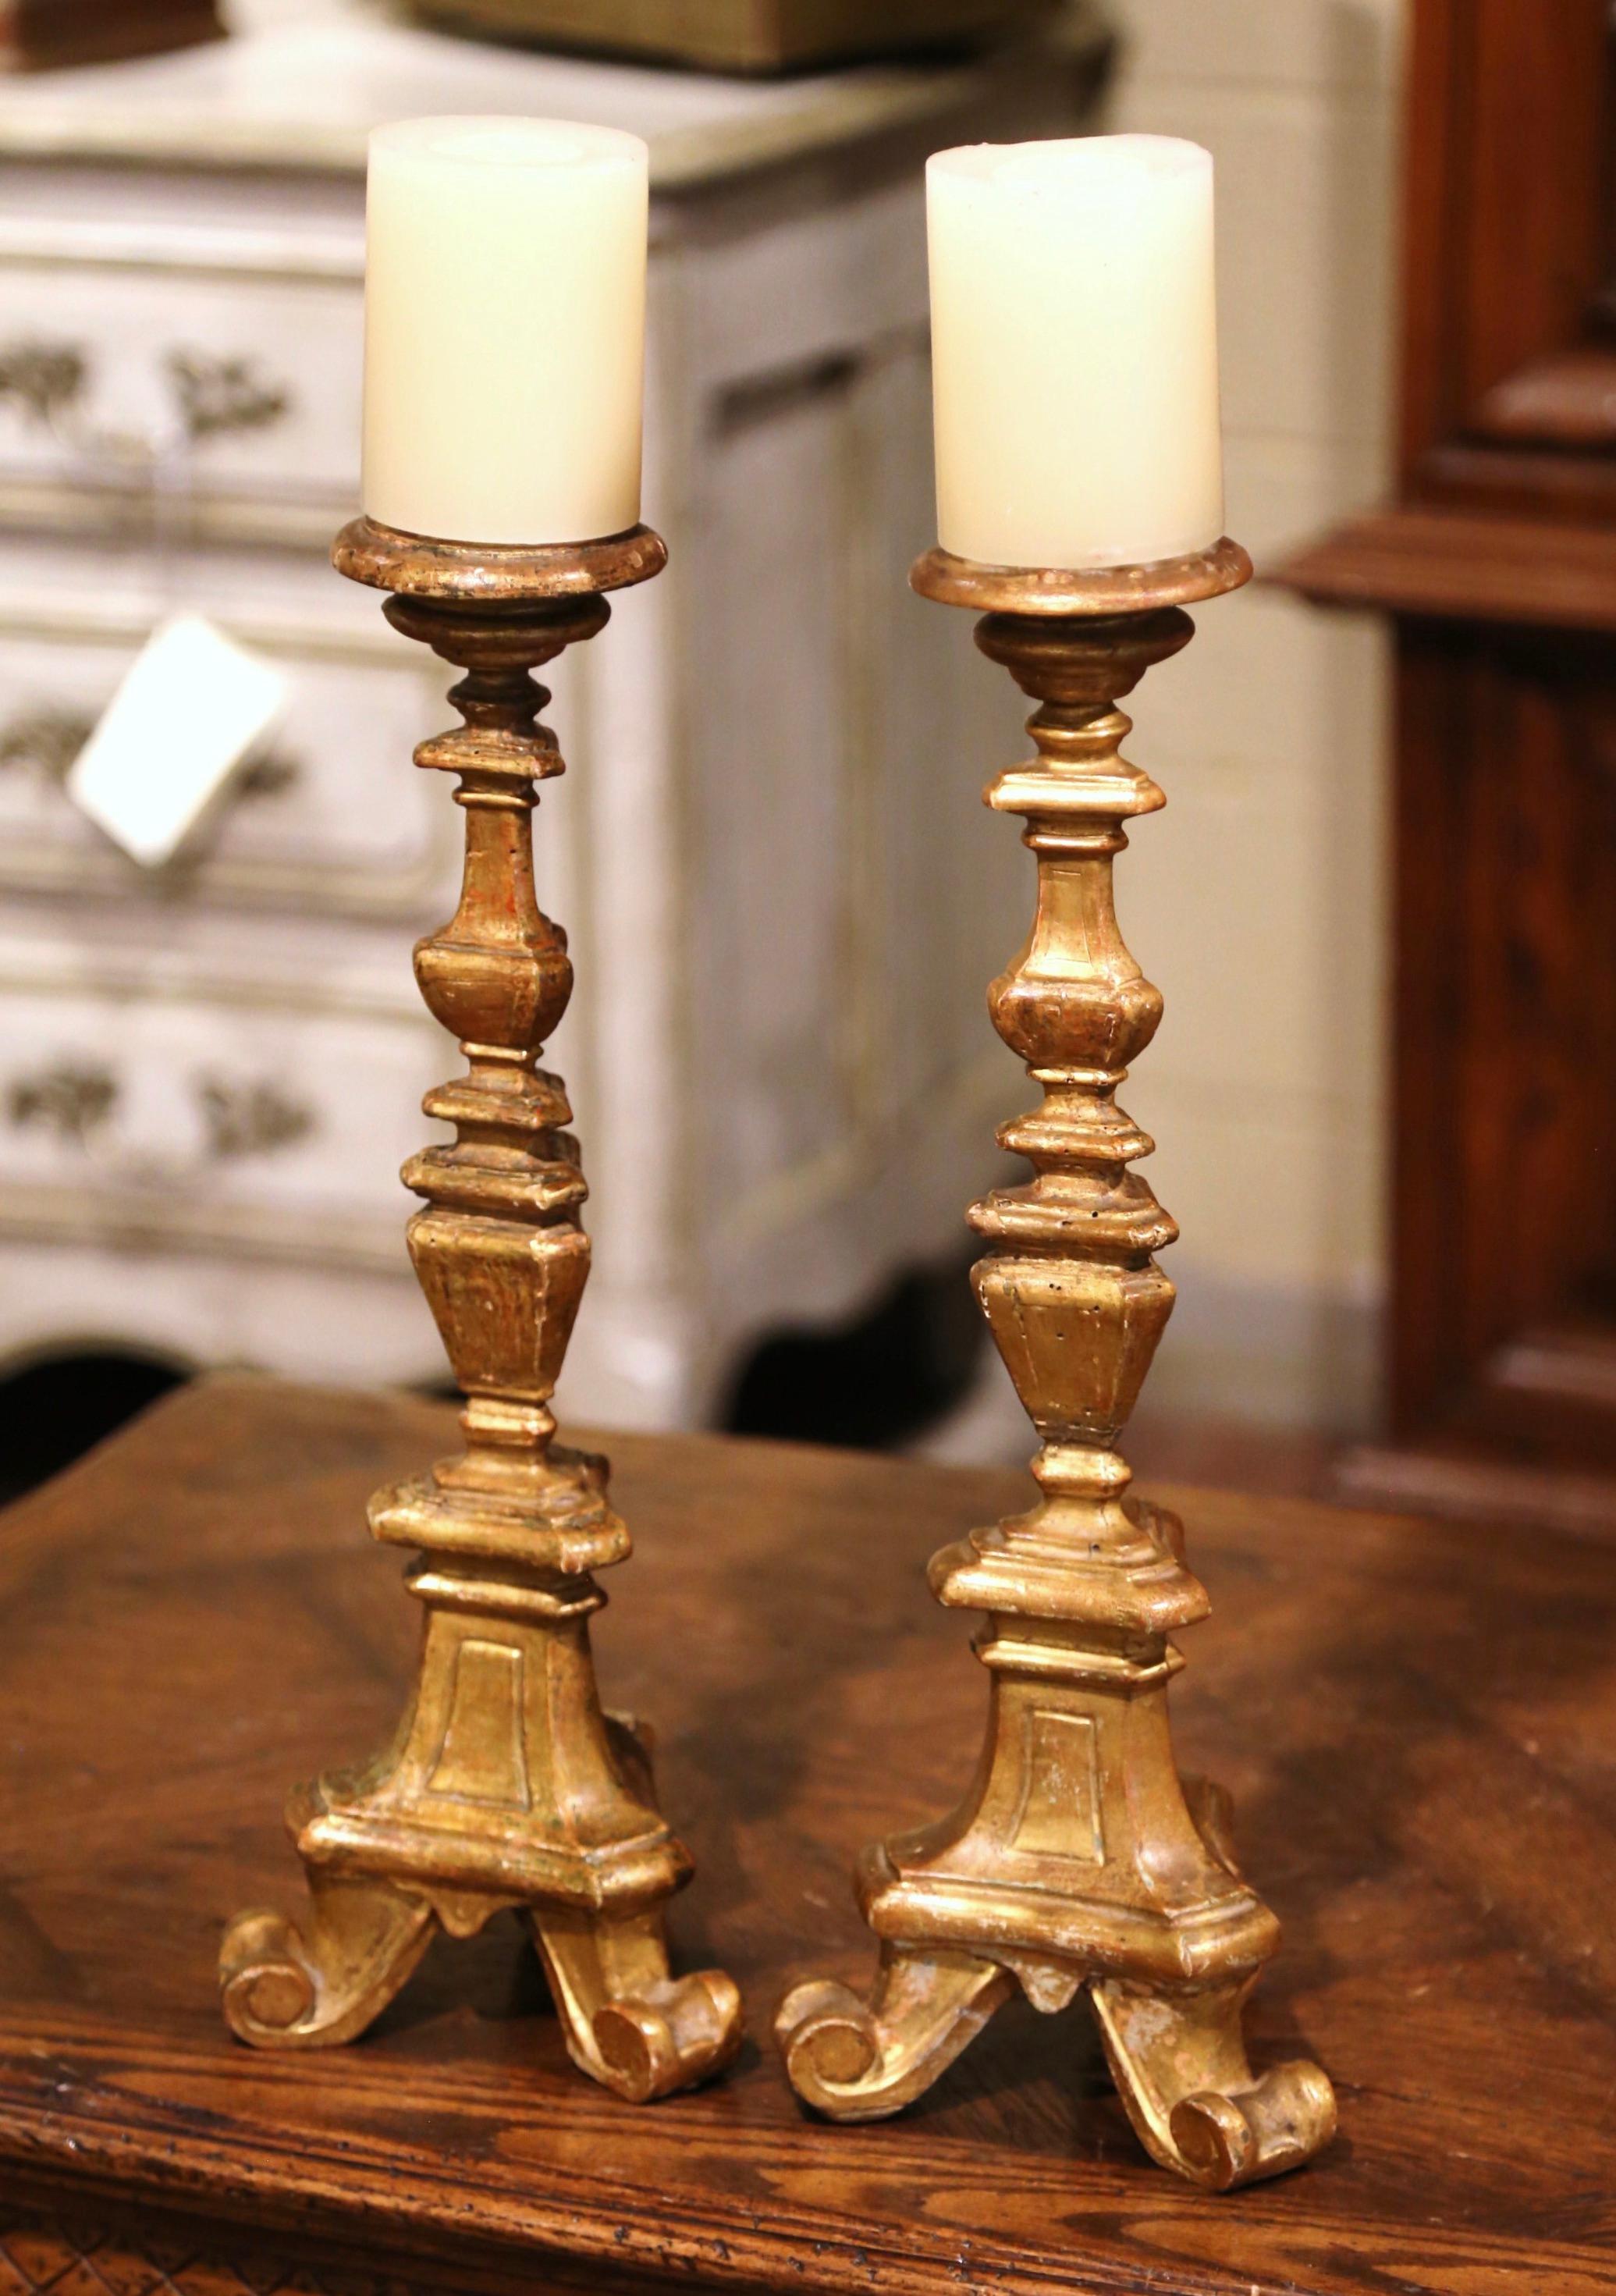 Created in Italy circa 1880, each two-tone candle holder stands on a three-leg base triangle base over a decorative carved stem. The detailed church candlesticks flaunt their beautiful, original patinated gilt finish. Both pieces are in excellent